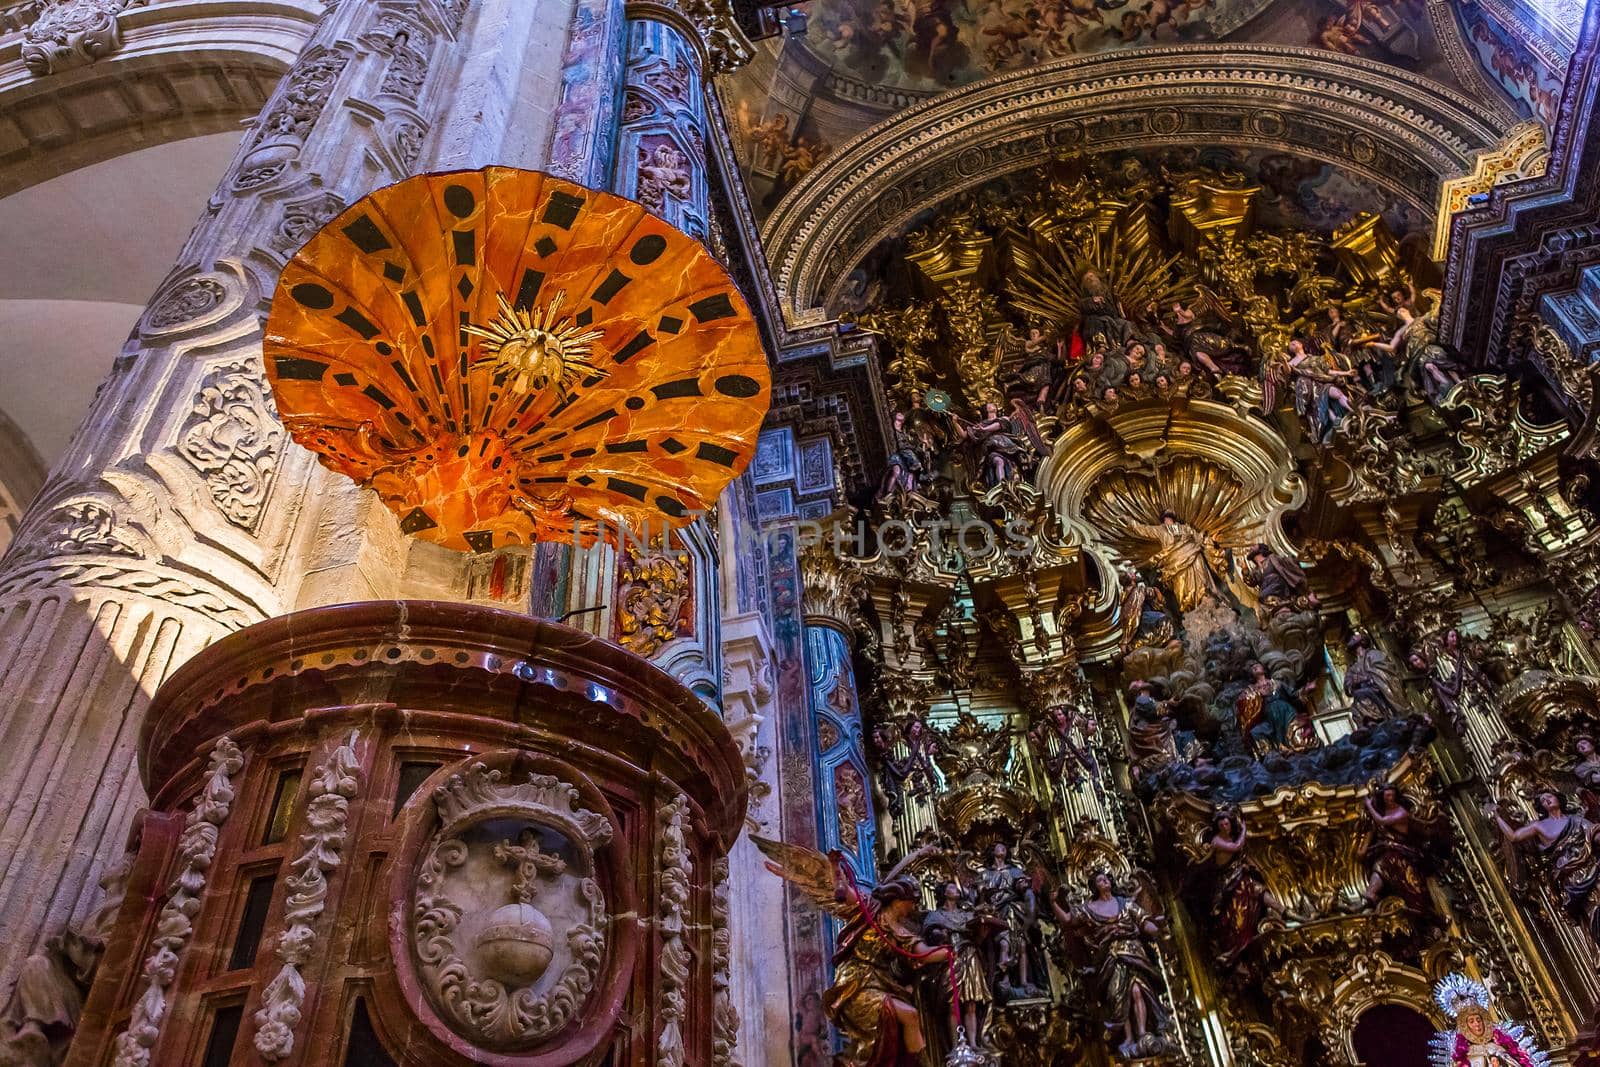 El Salvador church, Seville, Andalusia, spain by photogolfer